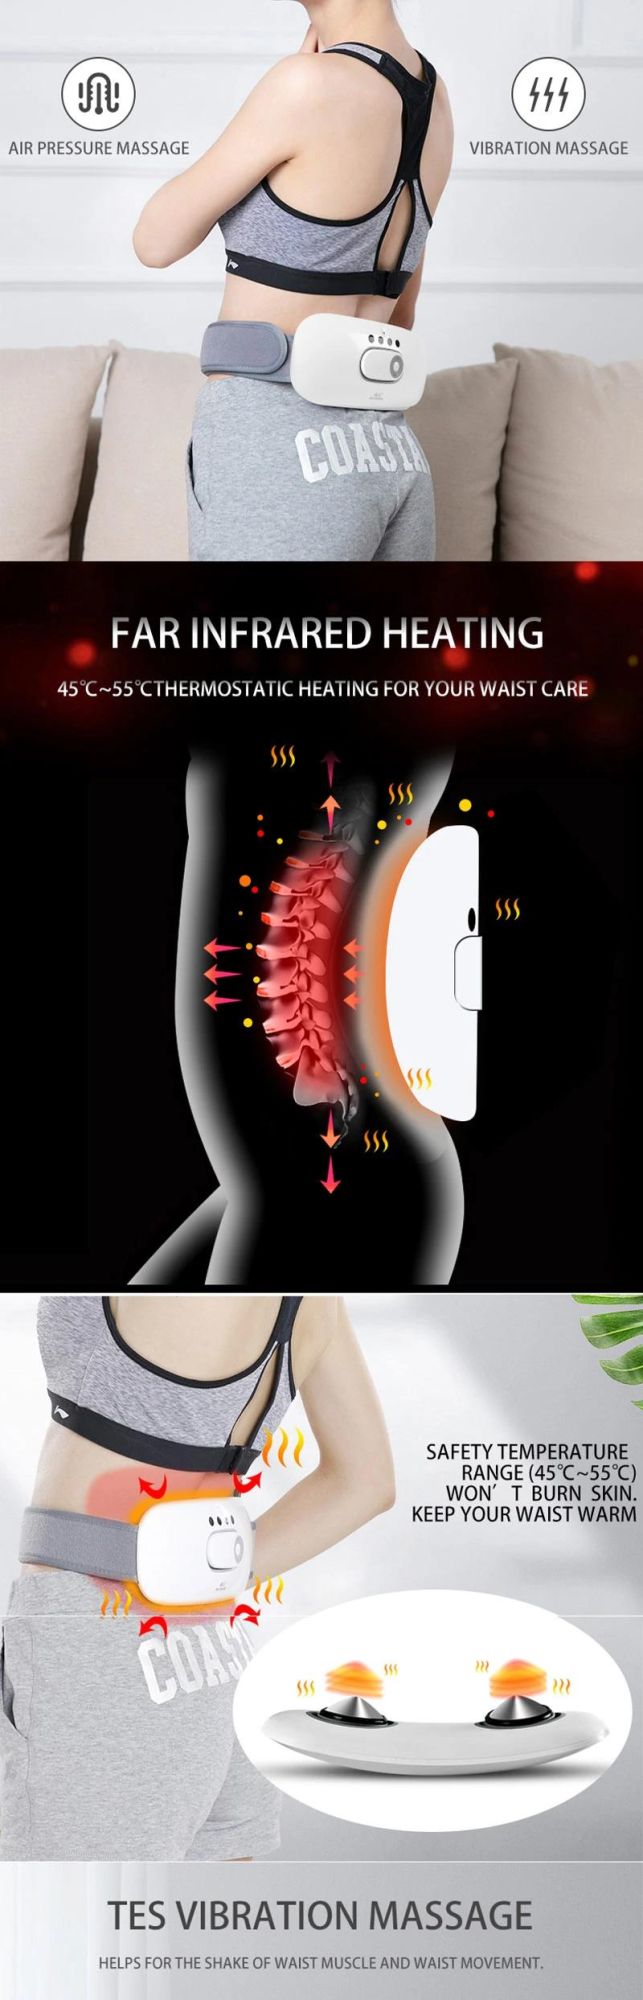 Hezheng Electric Low Back Slimming Vibration Lose Weight Massage Belt with Heating Function